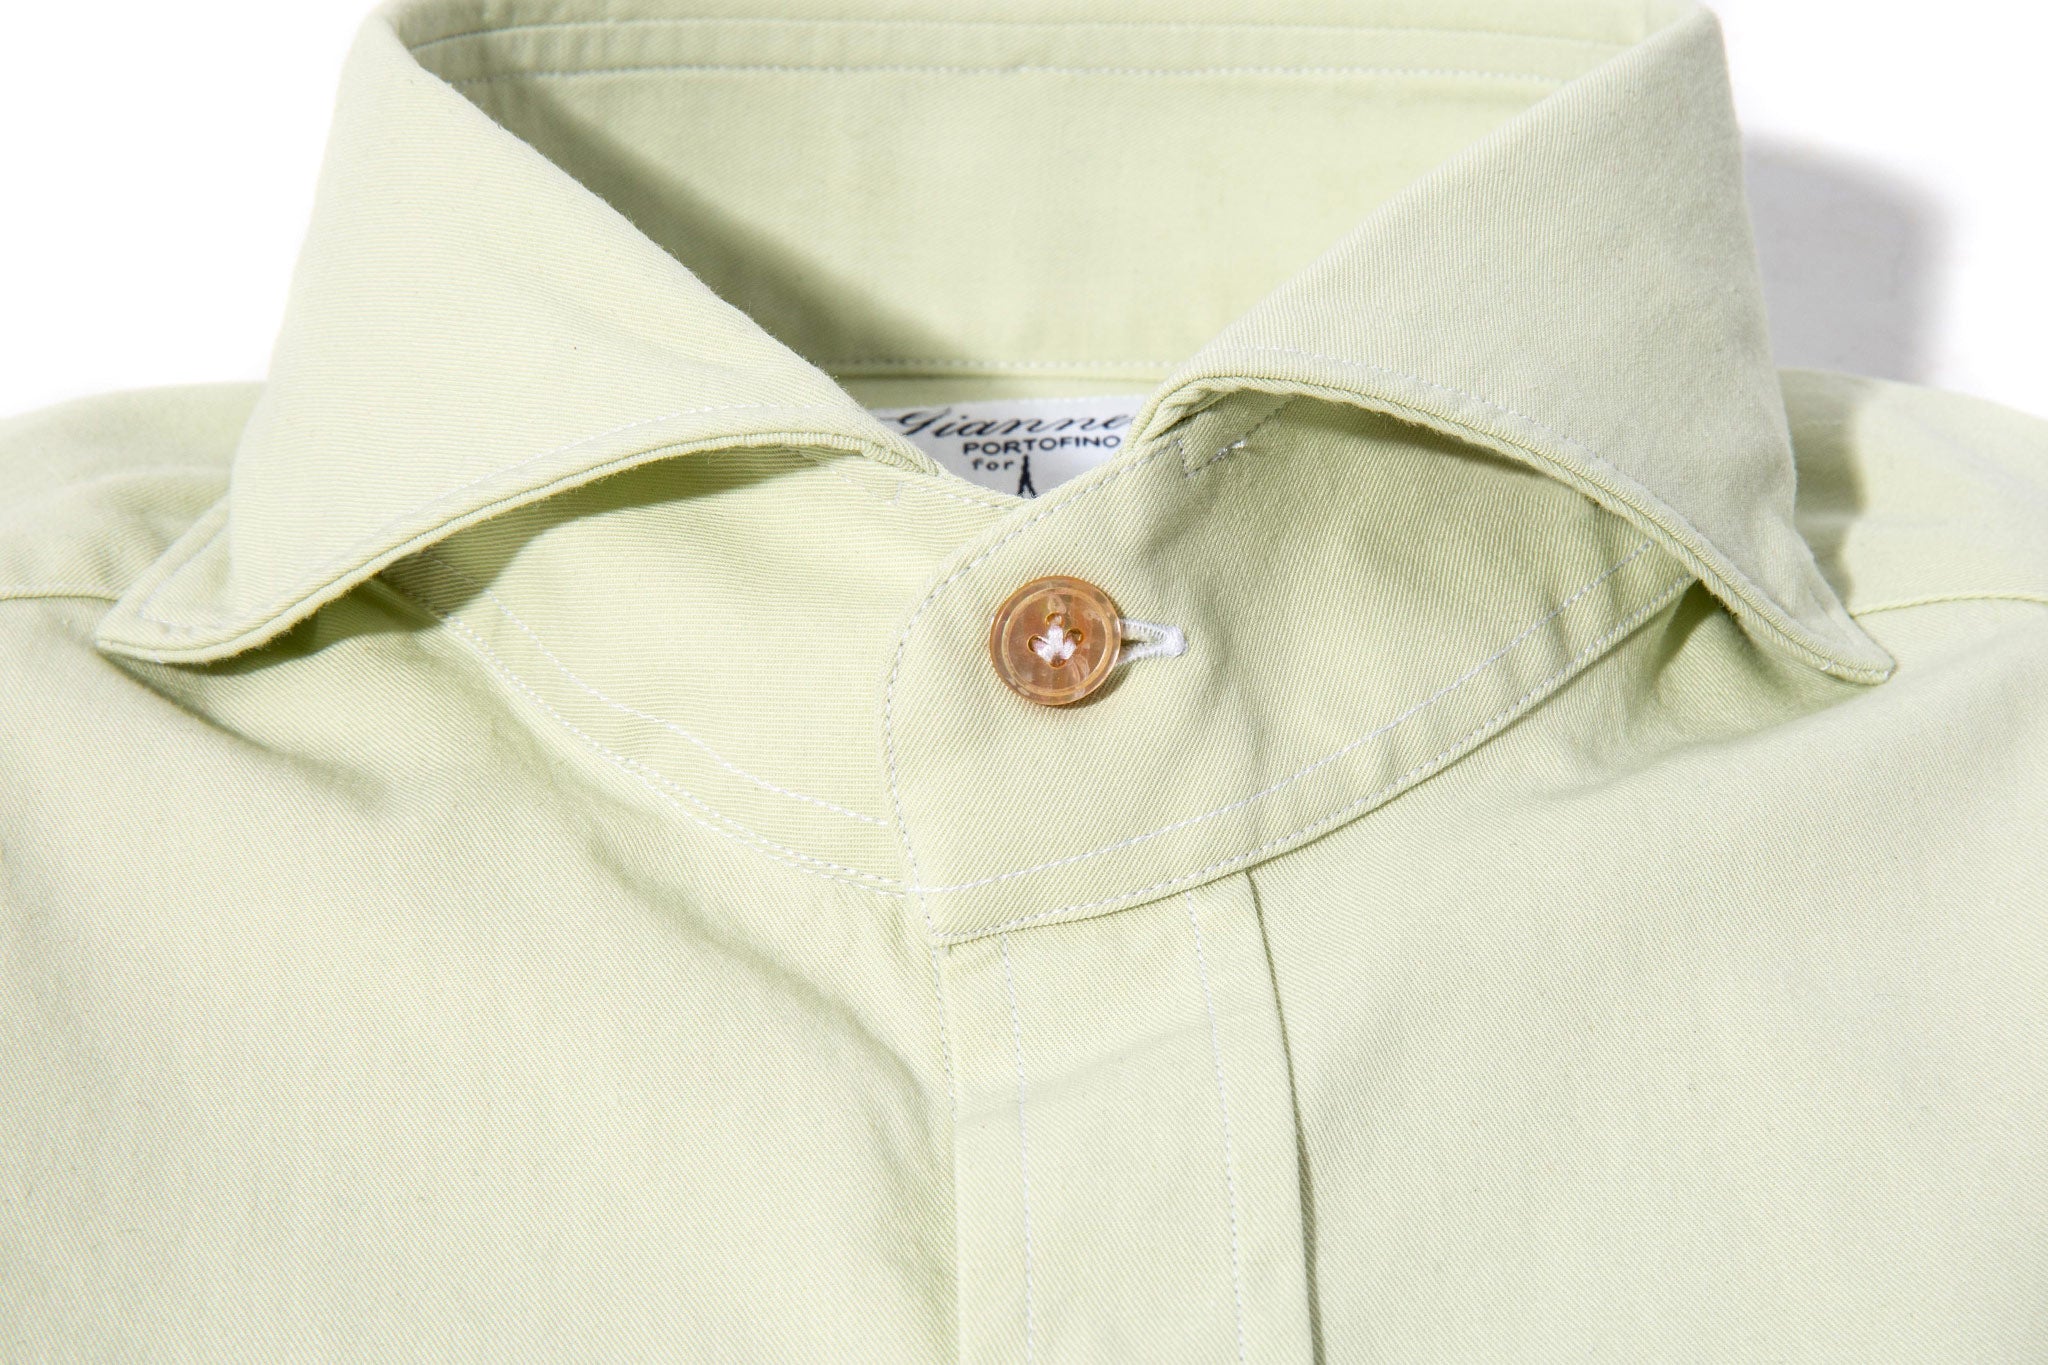 Griffin Snap Shirt In Light Green | Mens - Shirts - Outpost | Giannetto Portofino